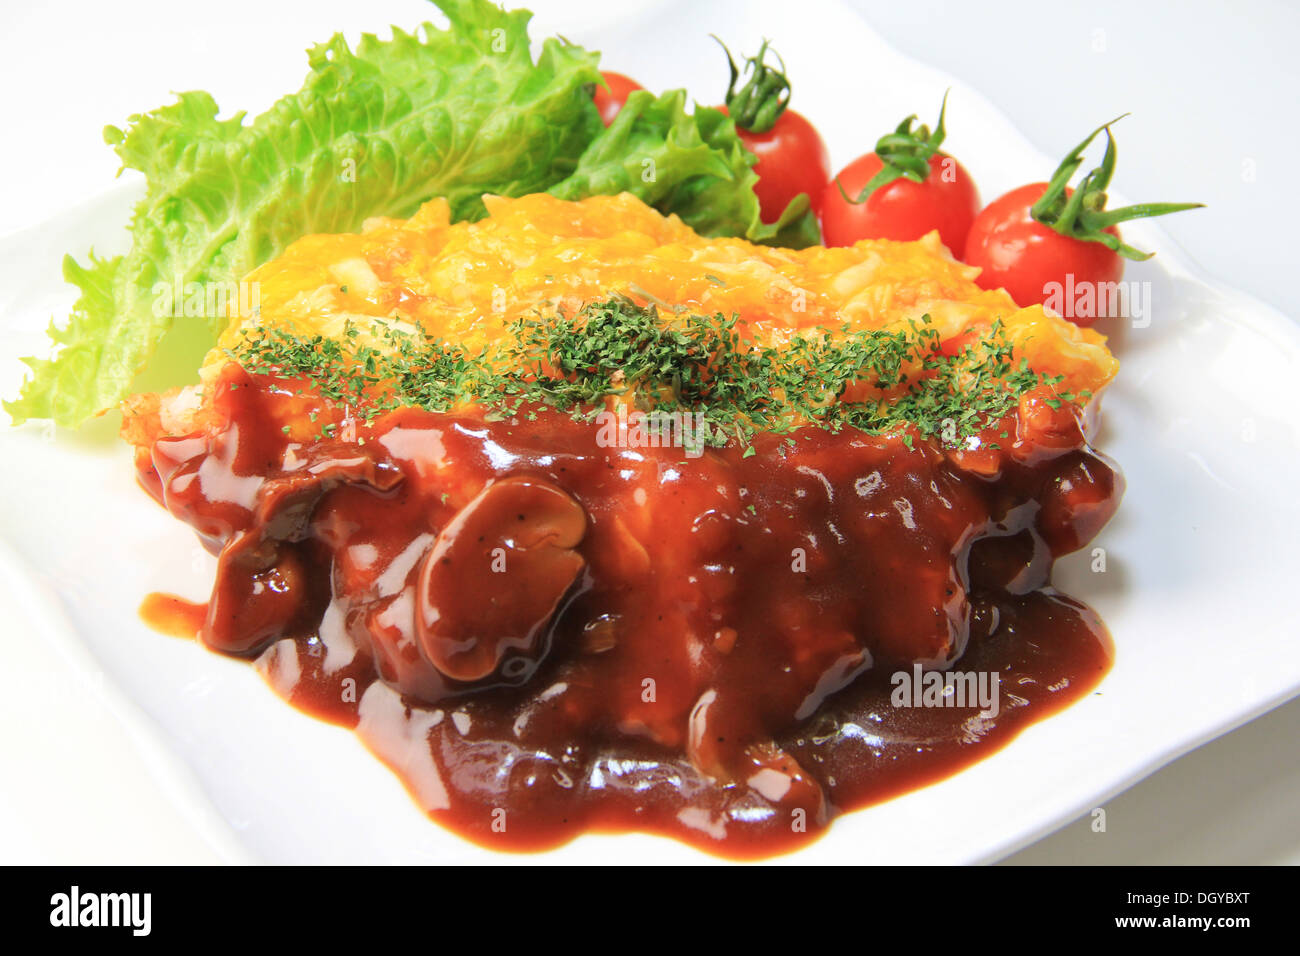 Omelette with rice Stock Photo